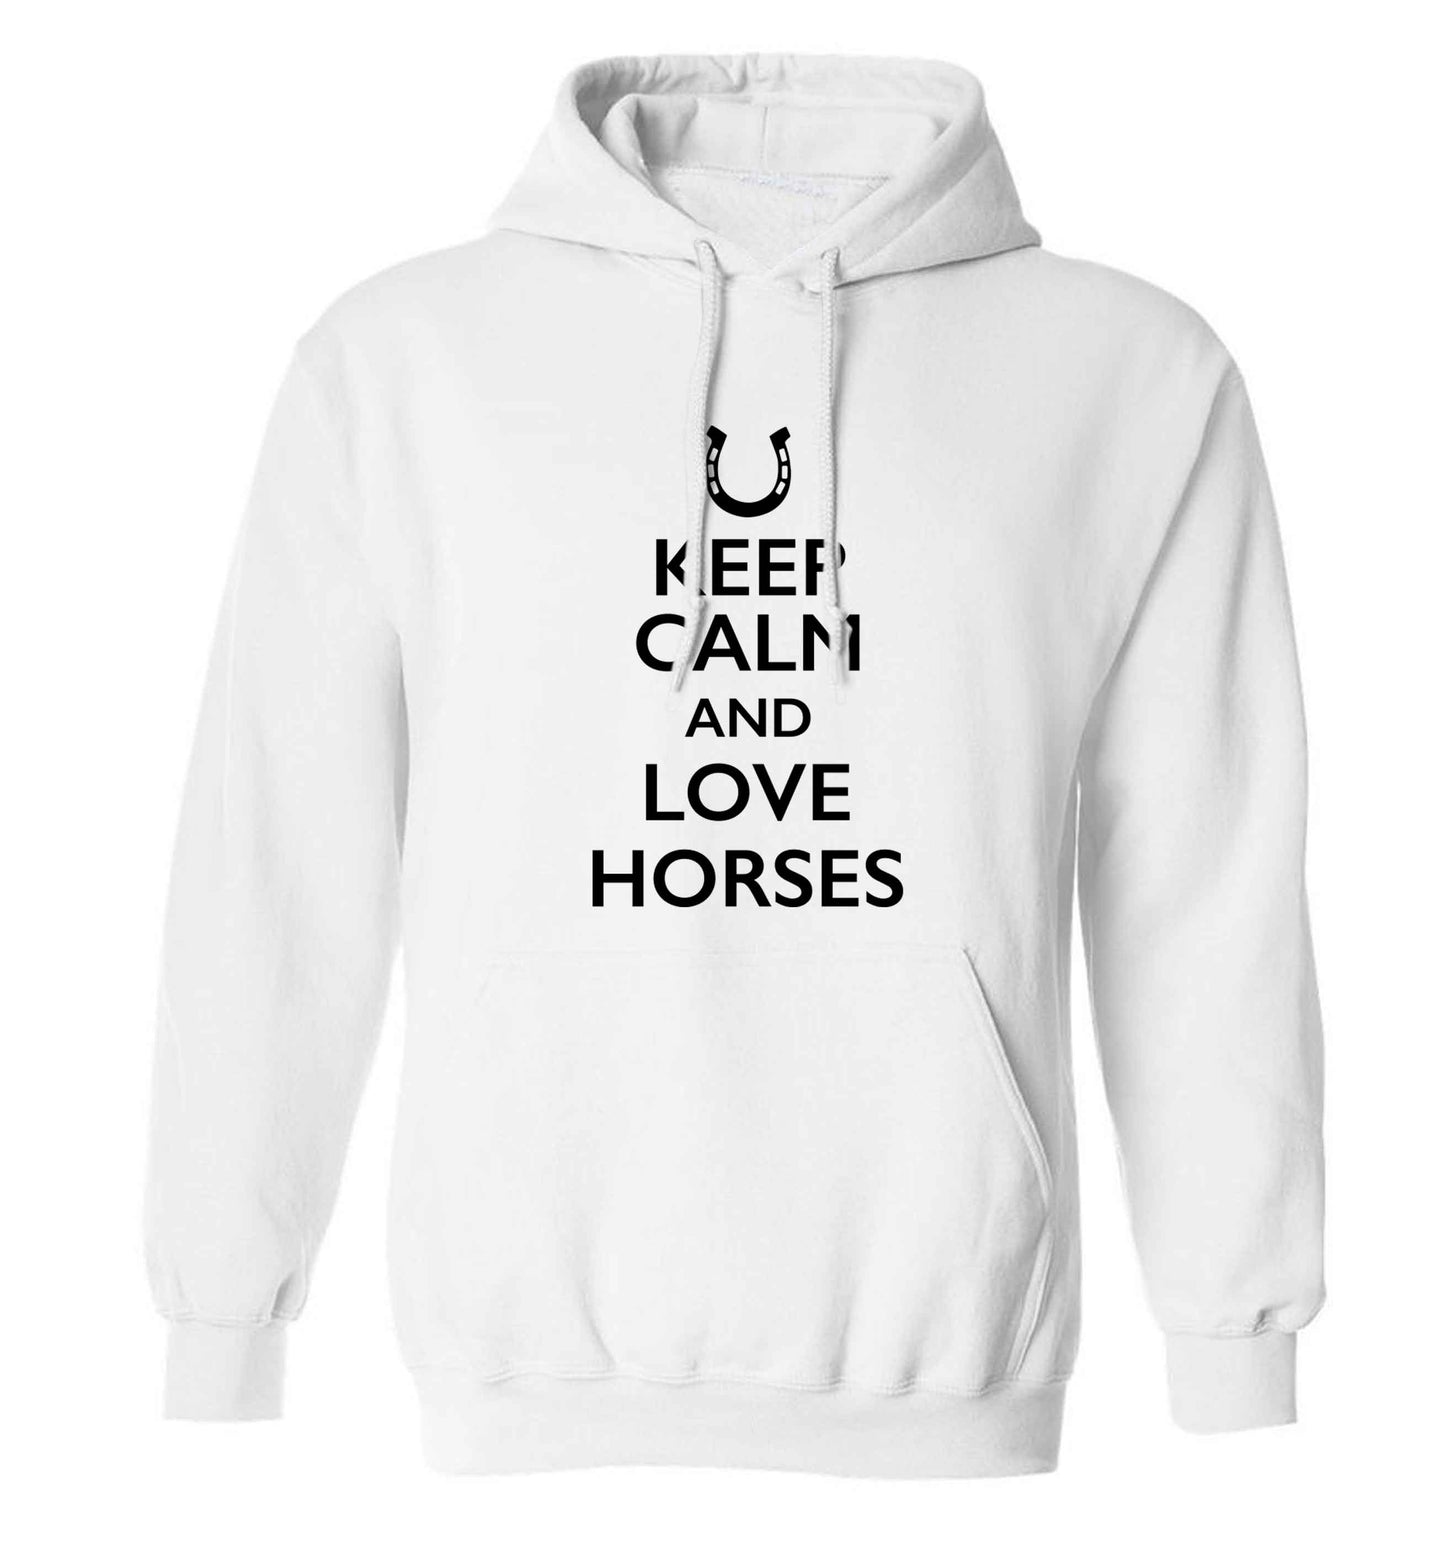 Keep calm and love horses adults unisex white hoodie 2XL